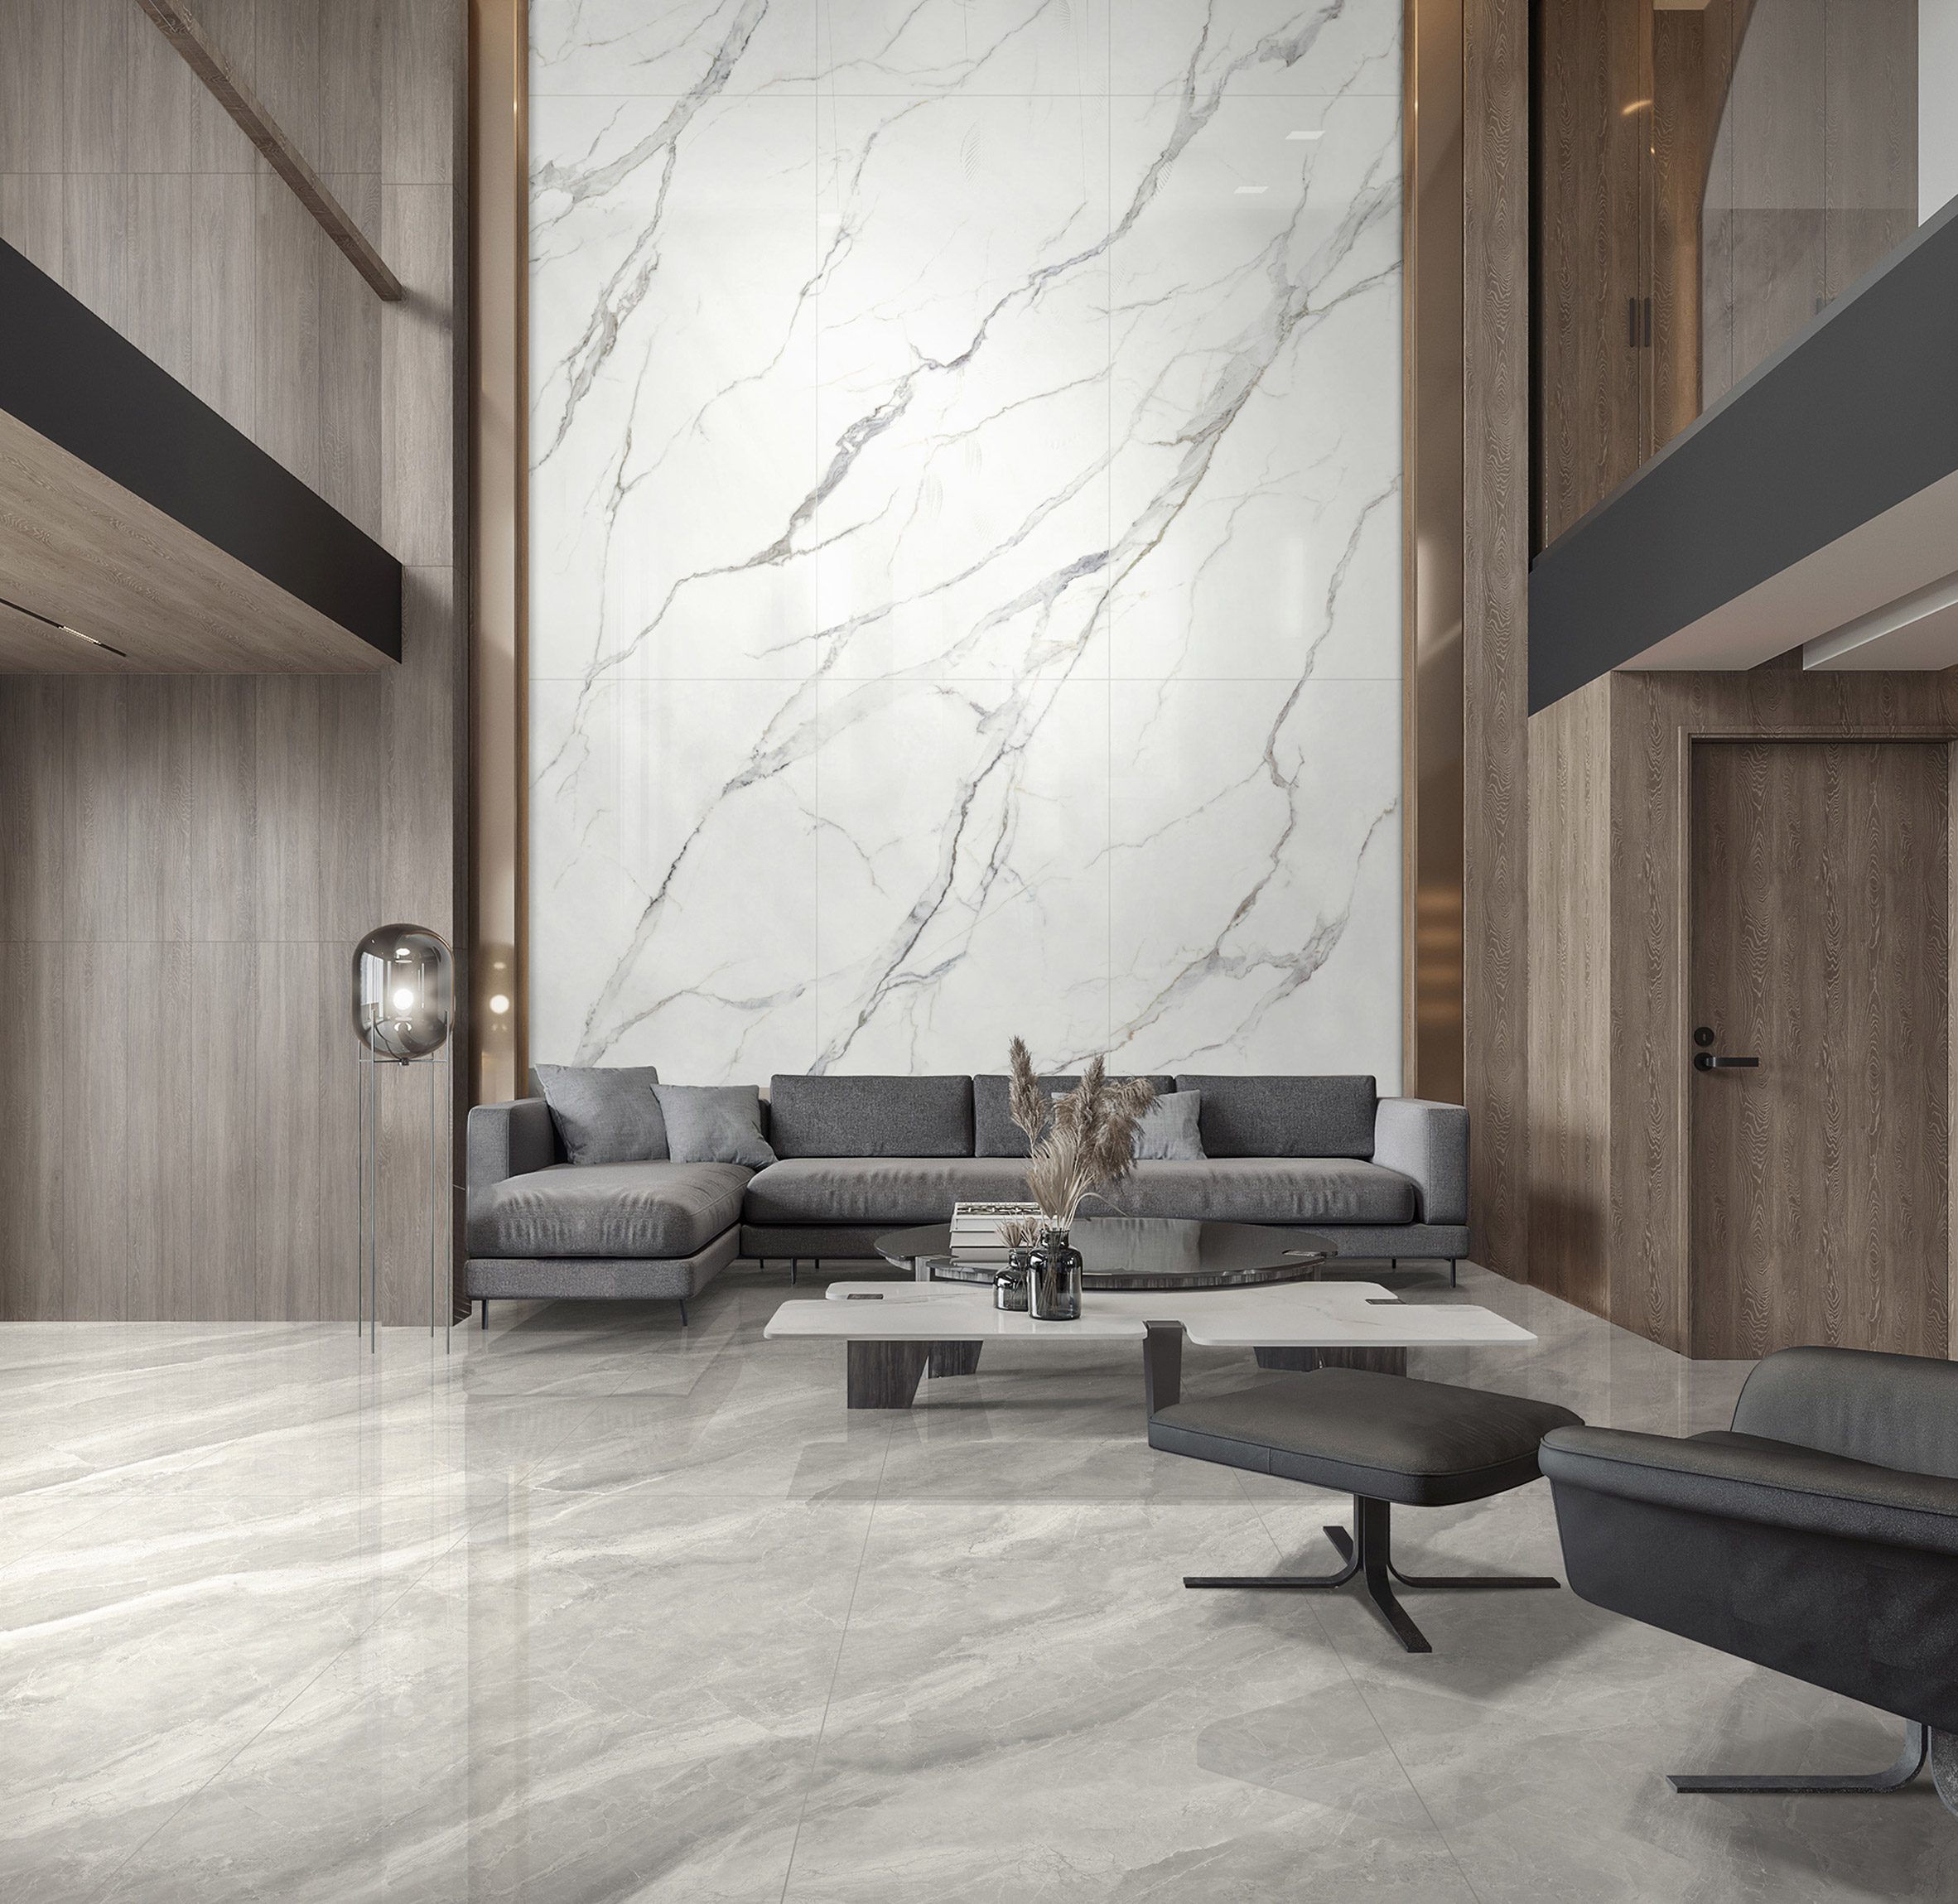 Faux marble porcelain tiles from Endless Vein collection by Kaolin in a foyer